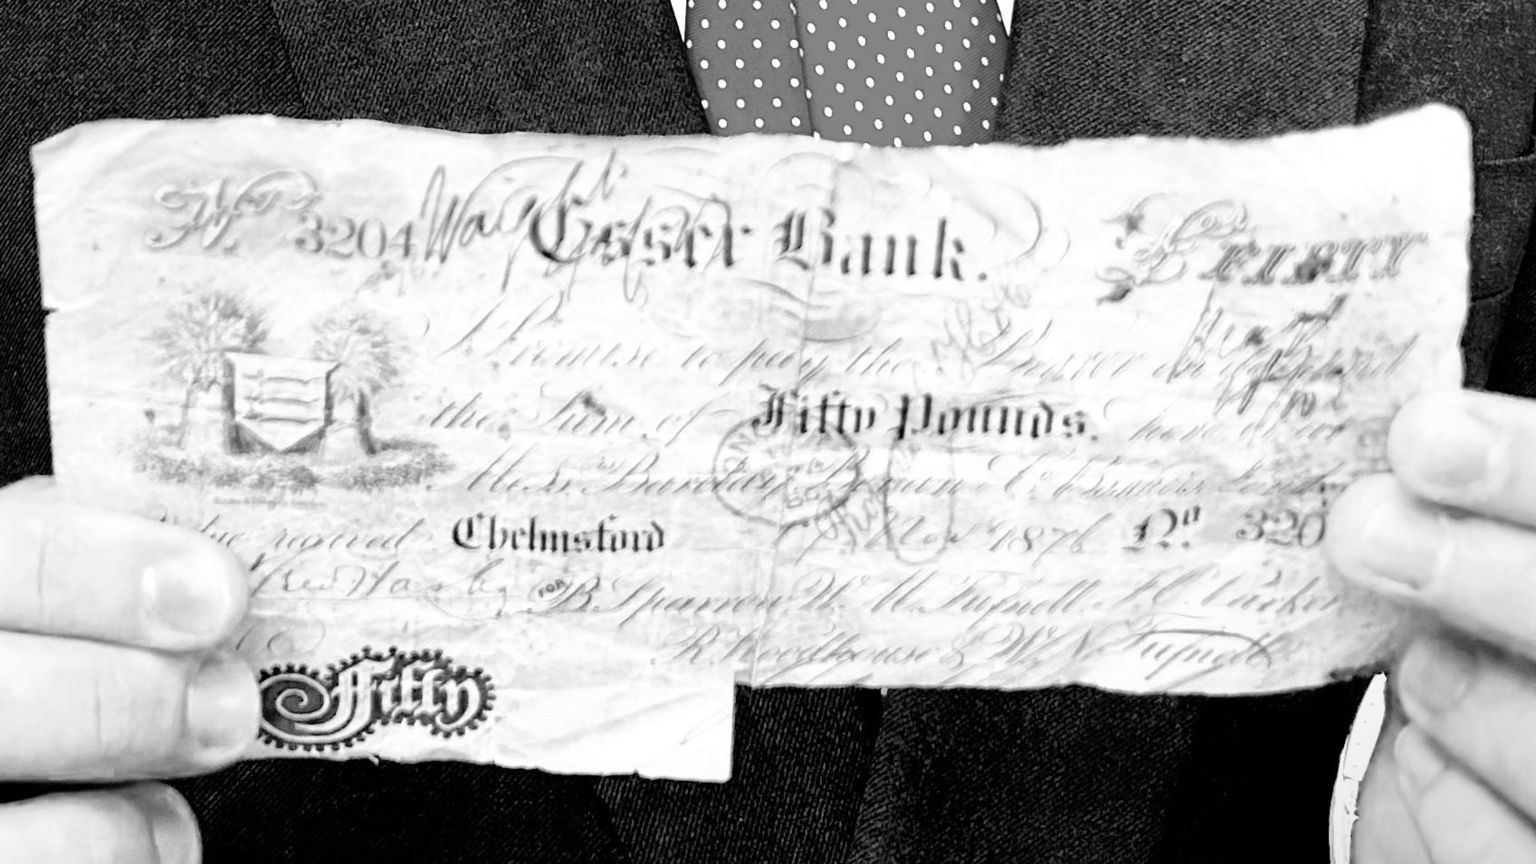 The fragile and battered fifty pound note from 1876 that was found by the schoolboy